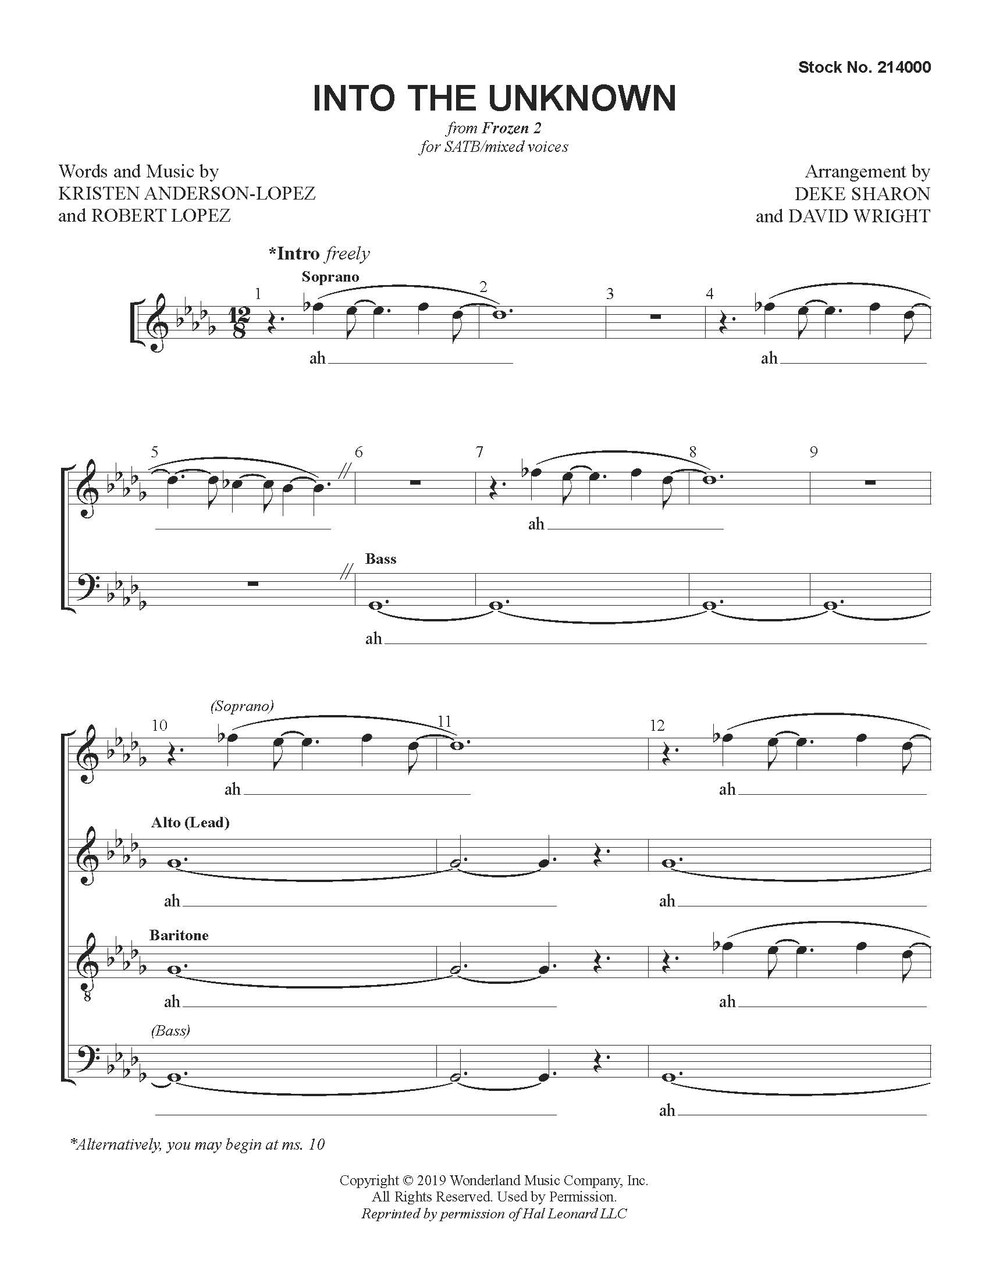 Into the Unknown (SATB) (arr. Sharon & Wright) - Download